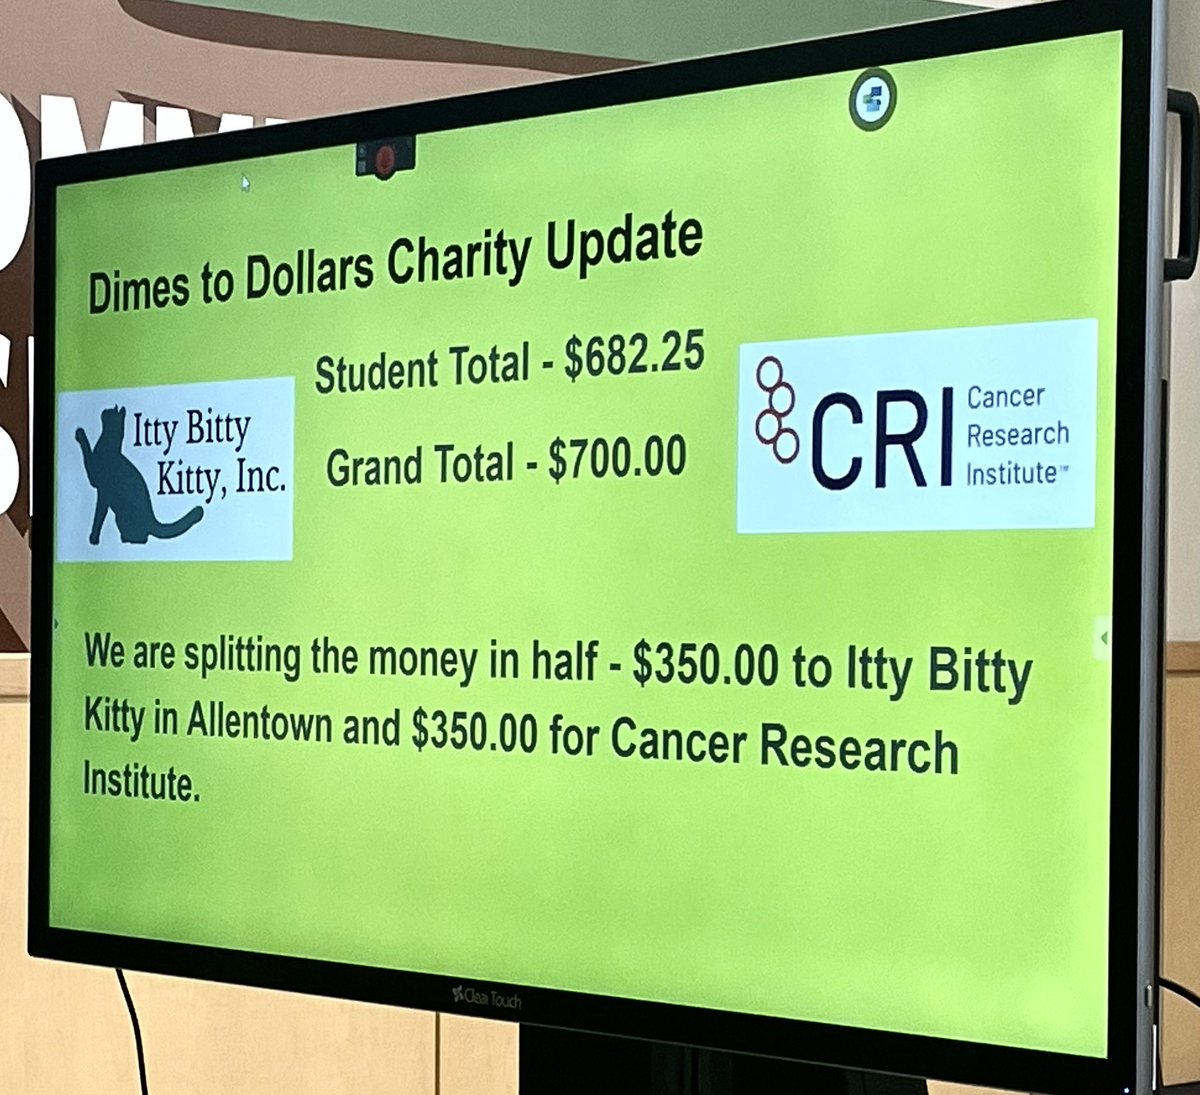 5th grade’s Dimes to Dollars Drive was a HUGE SUCCESS! Students raised $700 and donated $350 to Itty Bitty Kitty (cat rescue) and  $350 to The Cancer Research Institute. Amazing job 5th grade! #qcsd @NeidigElem @mrs_sderby @Jen_Strauss @mbenning1 @QCSDnews @QCEAed